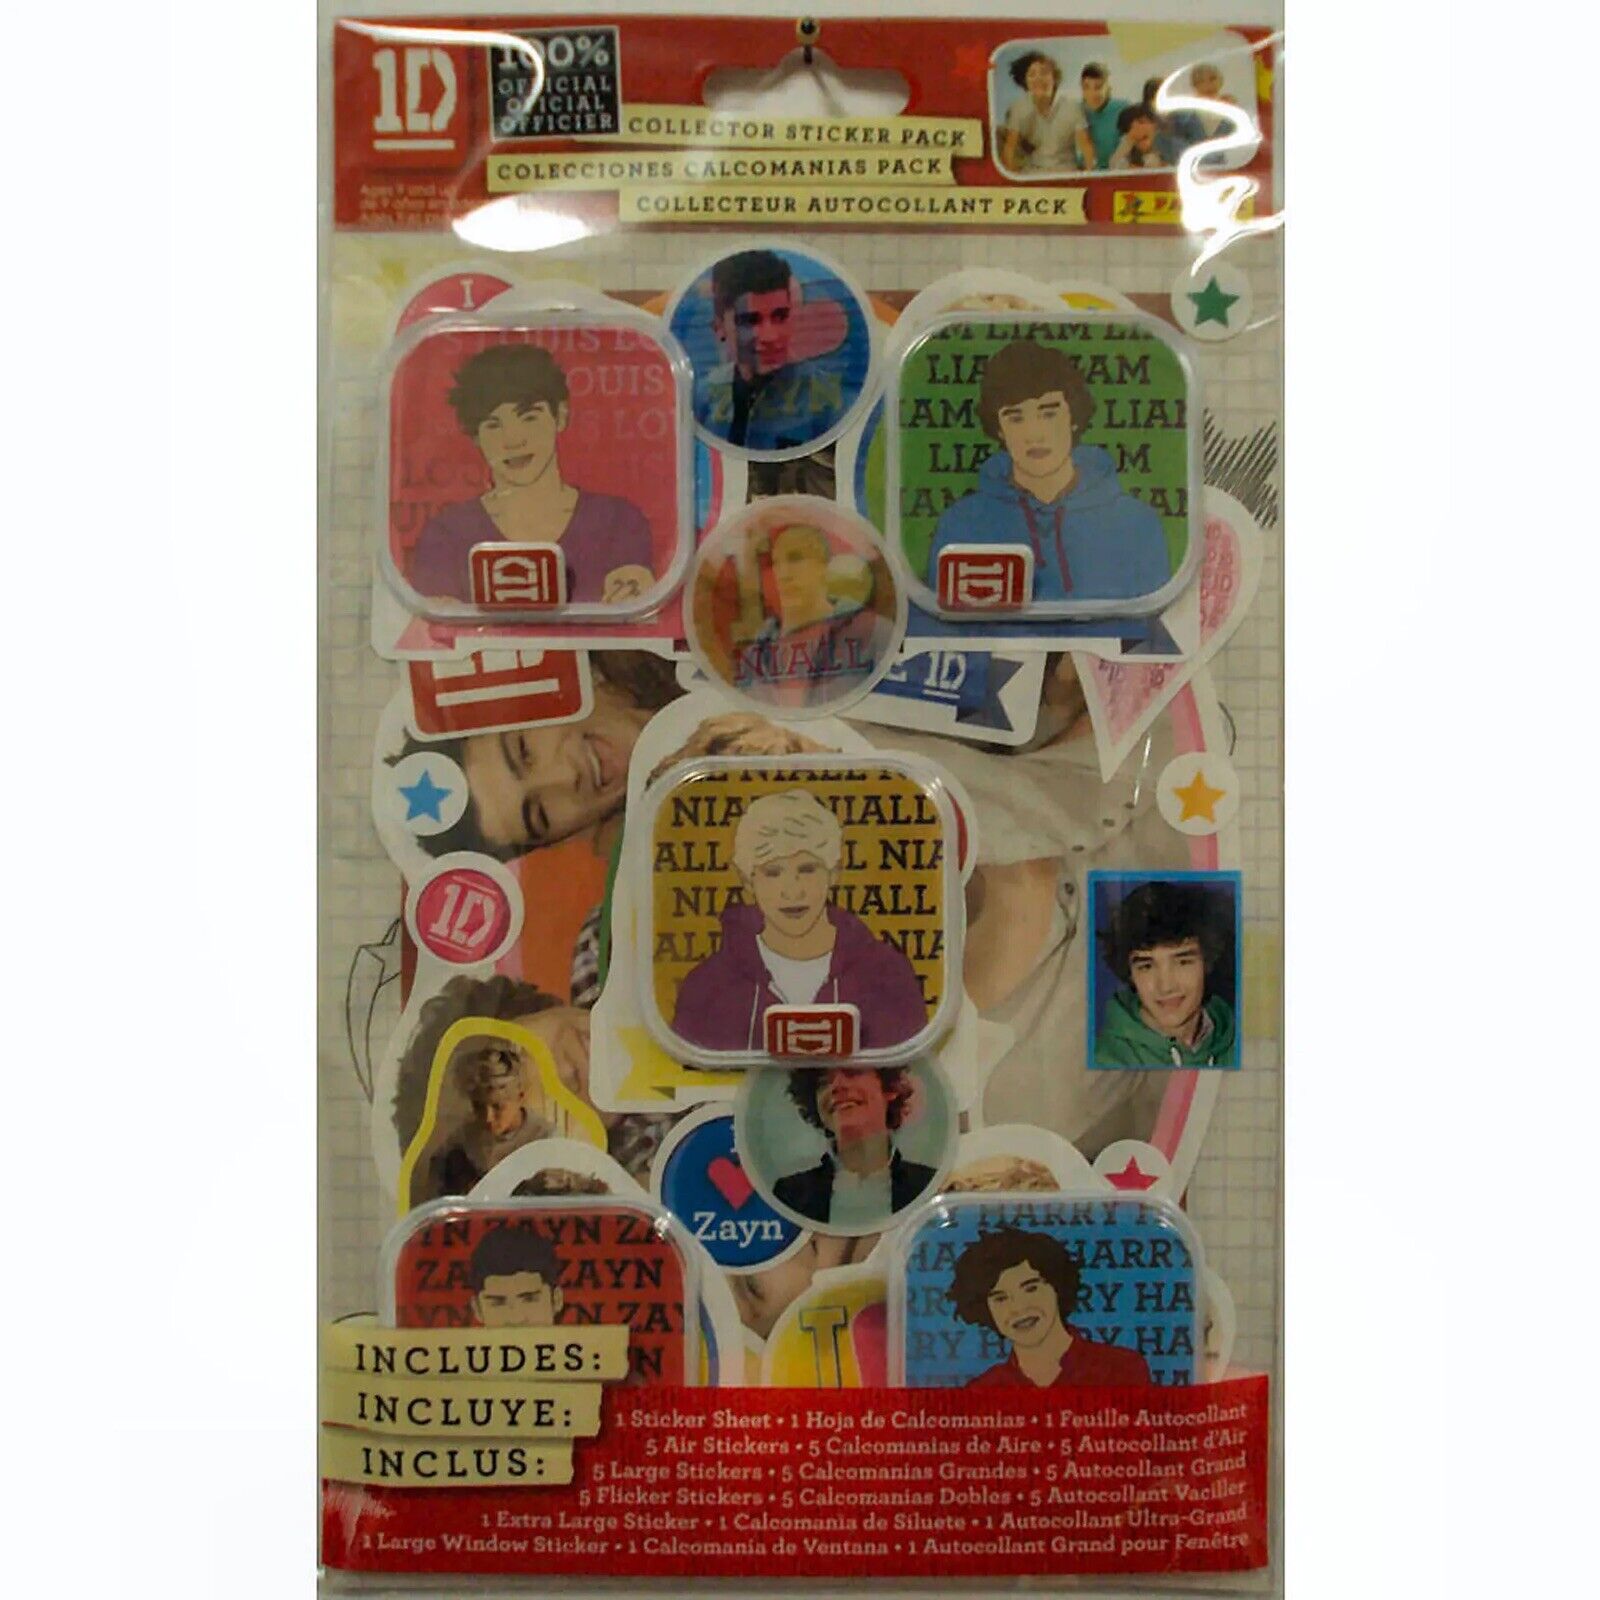 2012 Panini One Direction 1D Collector Sticker Pack Sealed NEW